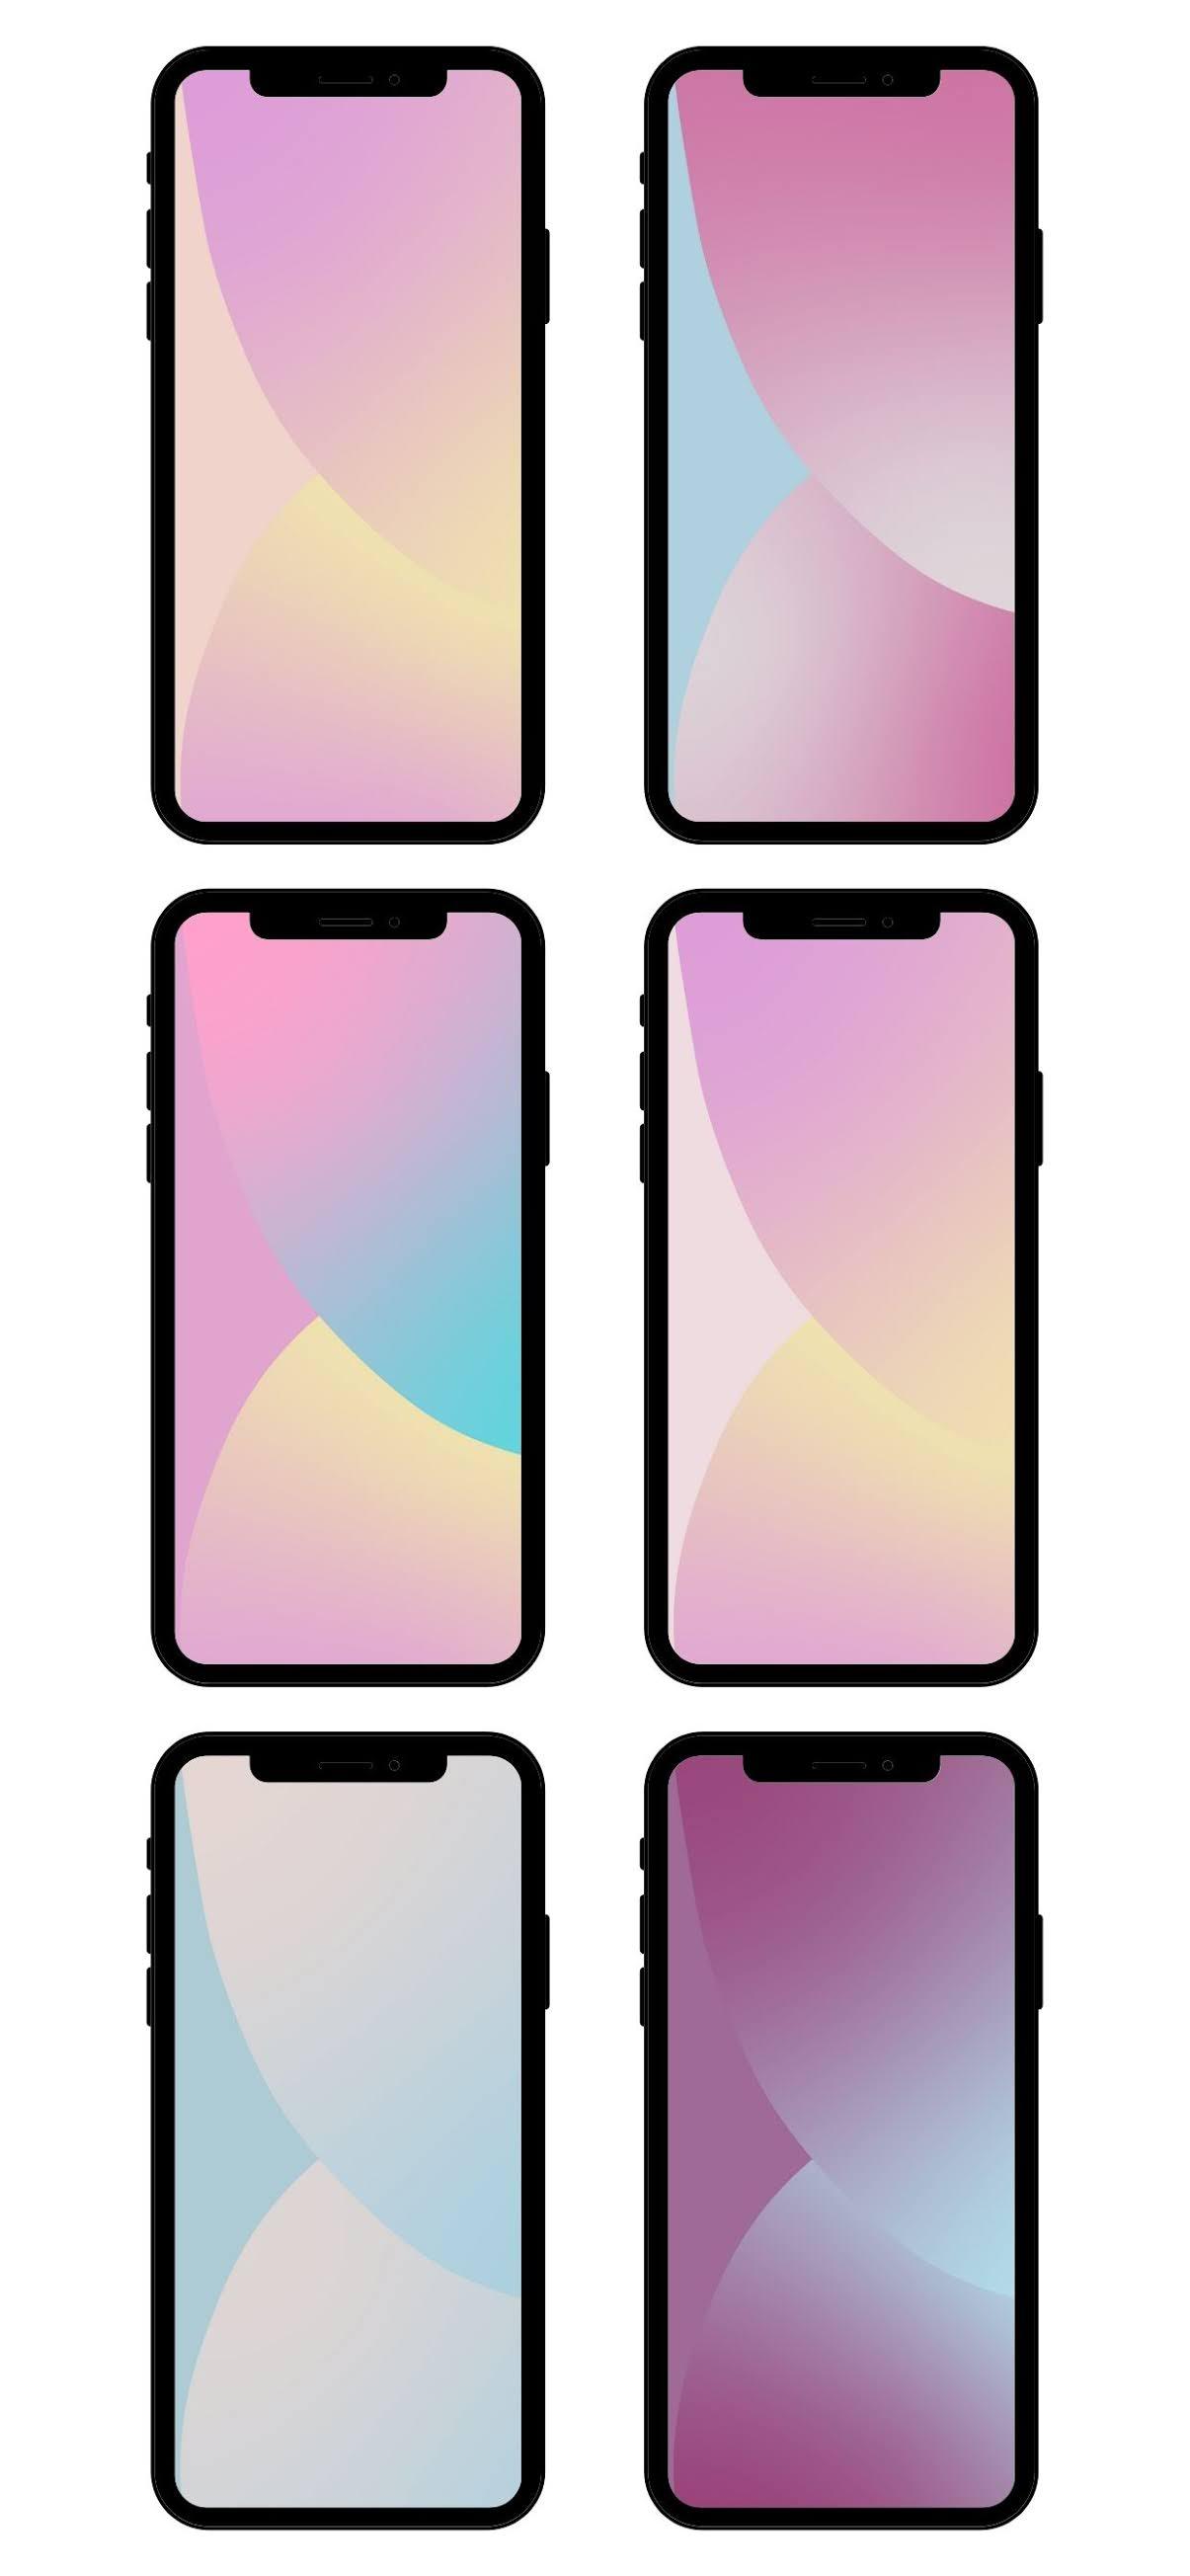 Iphone IOS 14 aesthetic pastel wallpapers